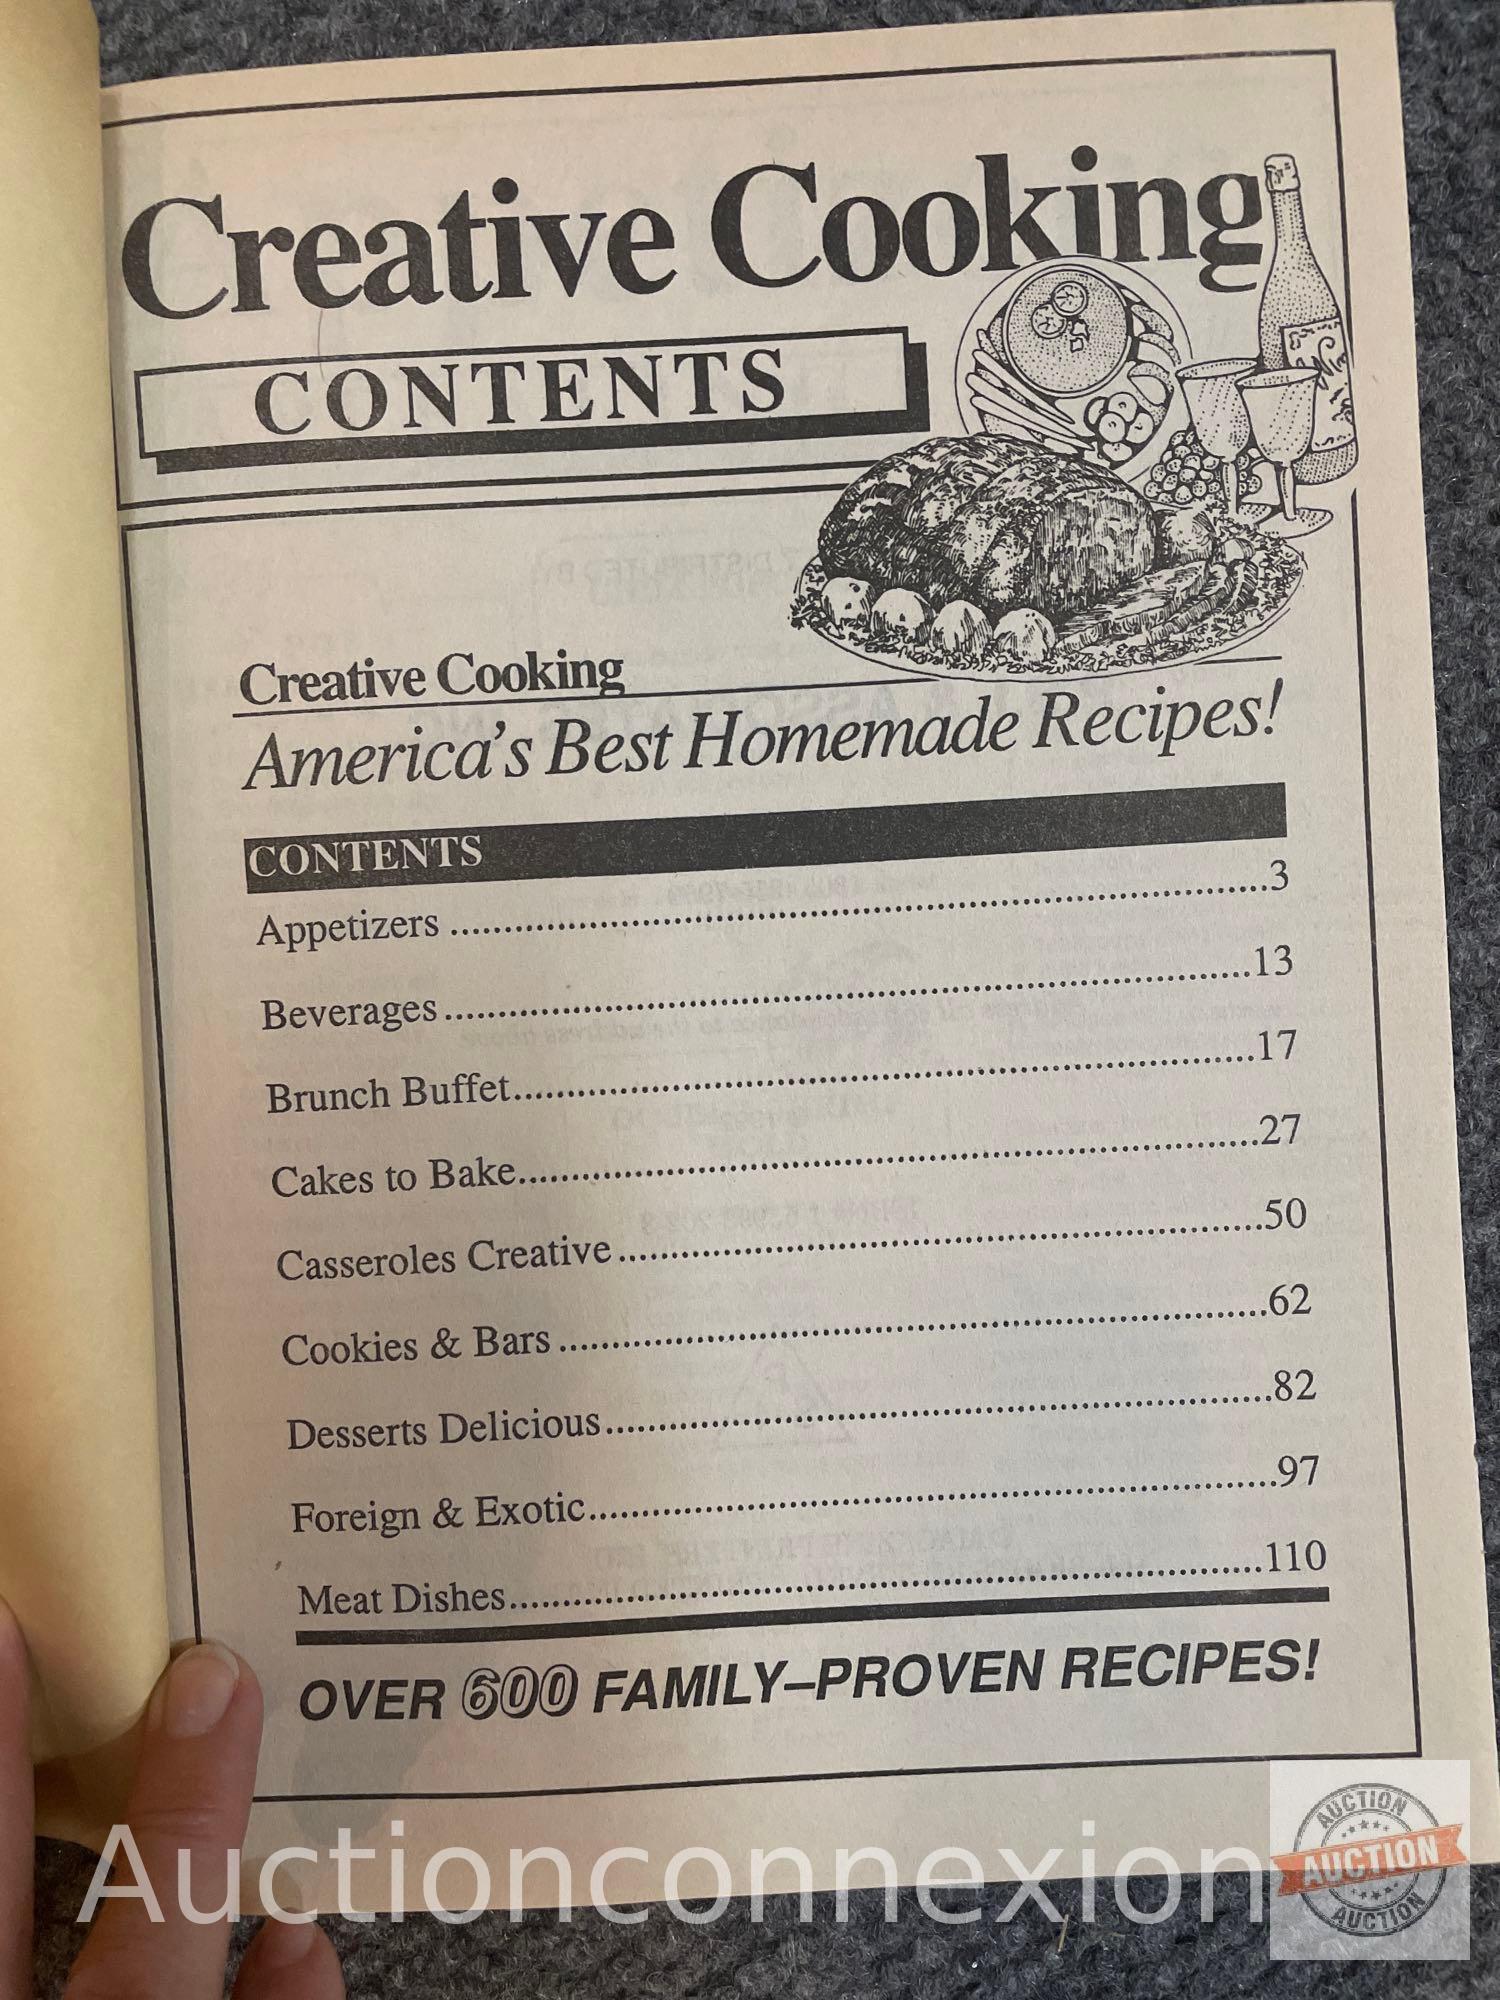 Cookbooks - 6 Women's Circle "Home Cooking"